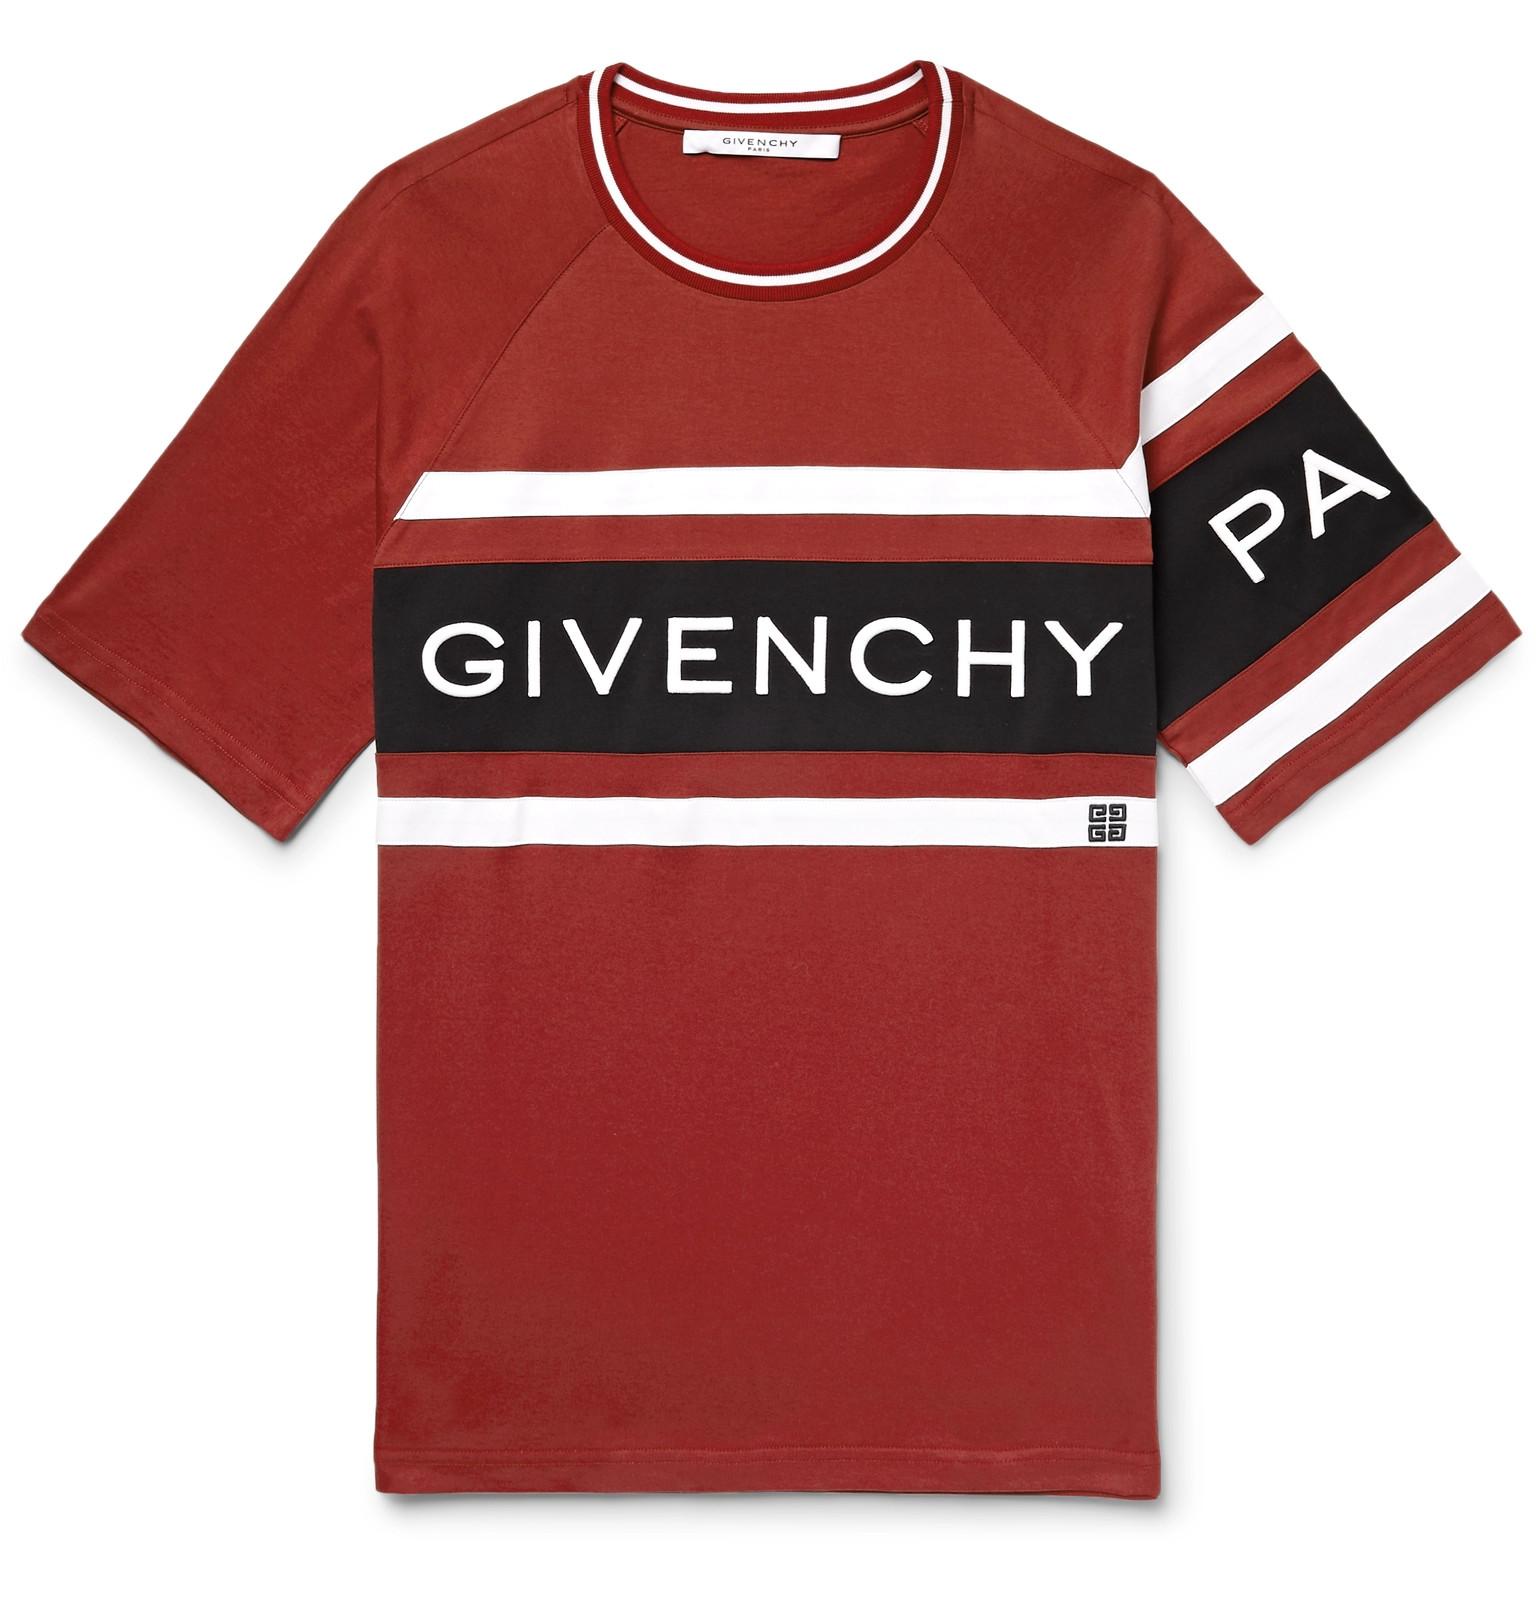 Givenchy Cotton Logo Colour-block T-shirt in Red for Men - Save 6% - Lyst